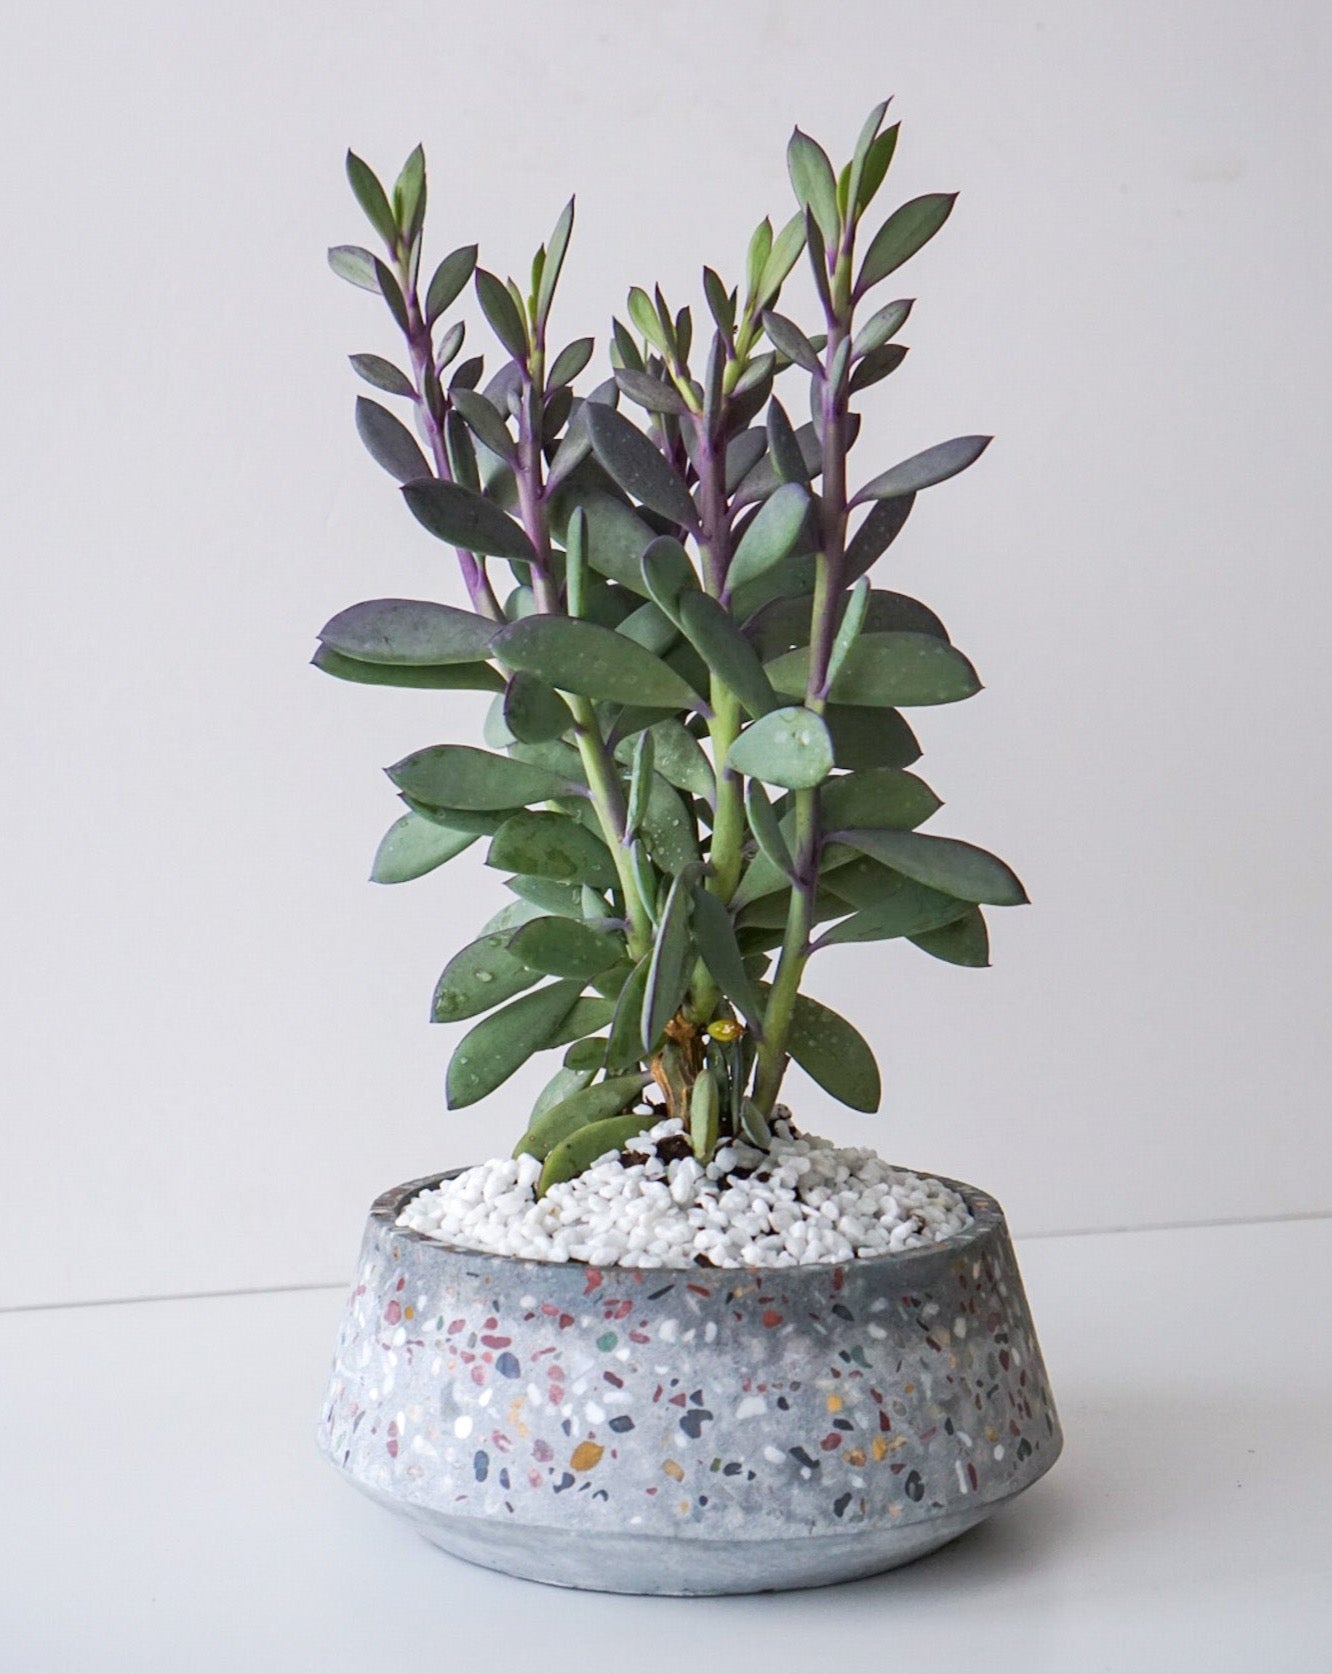 Lavender Steps is common name of Senecio Crassissimus Succulent. Planted in a grey terrazzo 8" x3.25" cement bowl. This succulent has blue-green fleshy leaves with purple margins. Thrives in bright, indirect sunlight. Water the soil when the soil is dry around every 2 weeks, less frequently in winter.